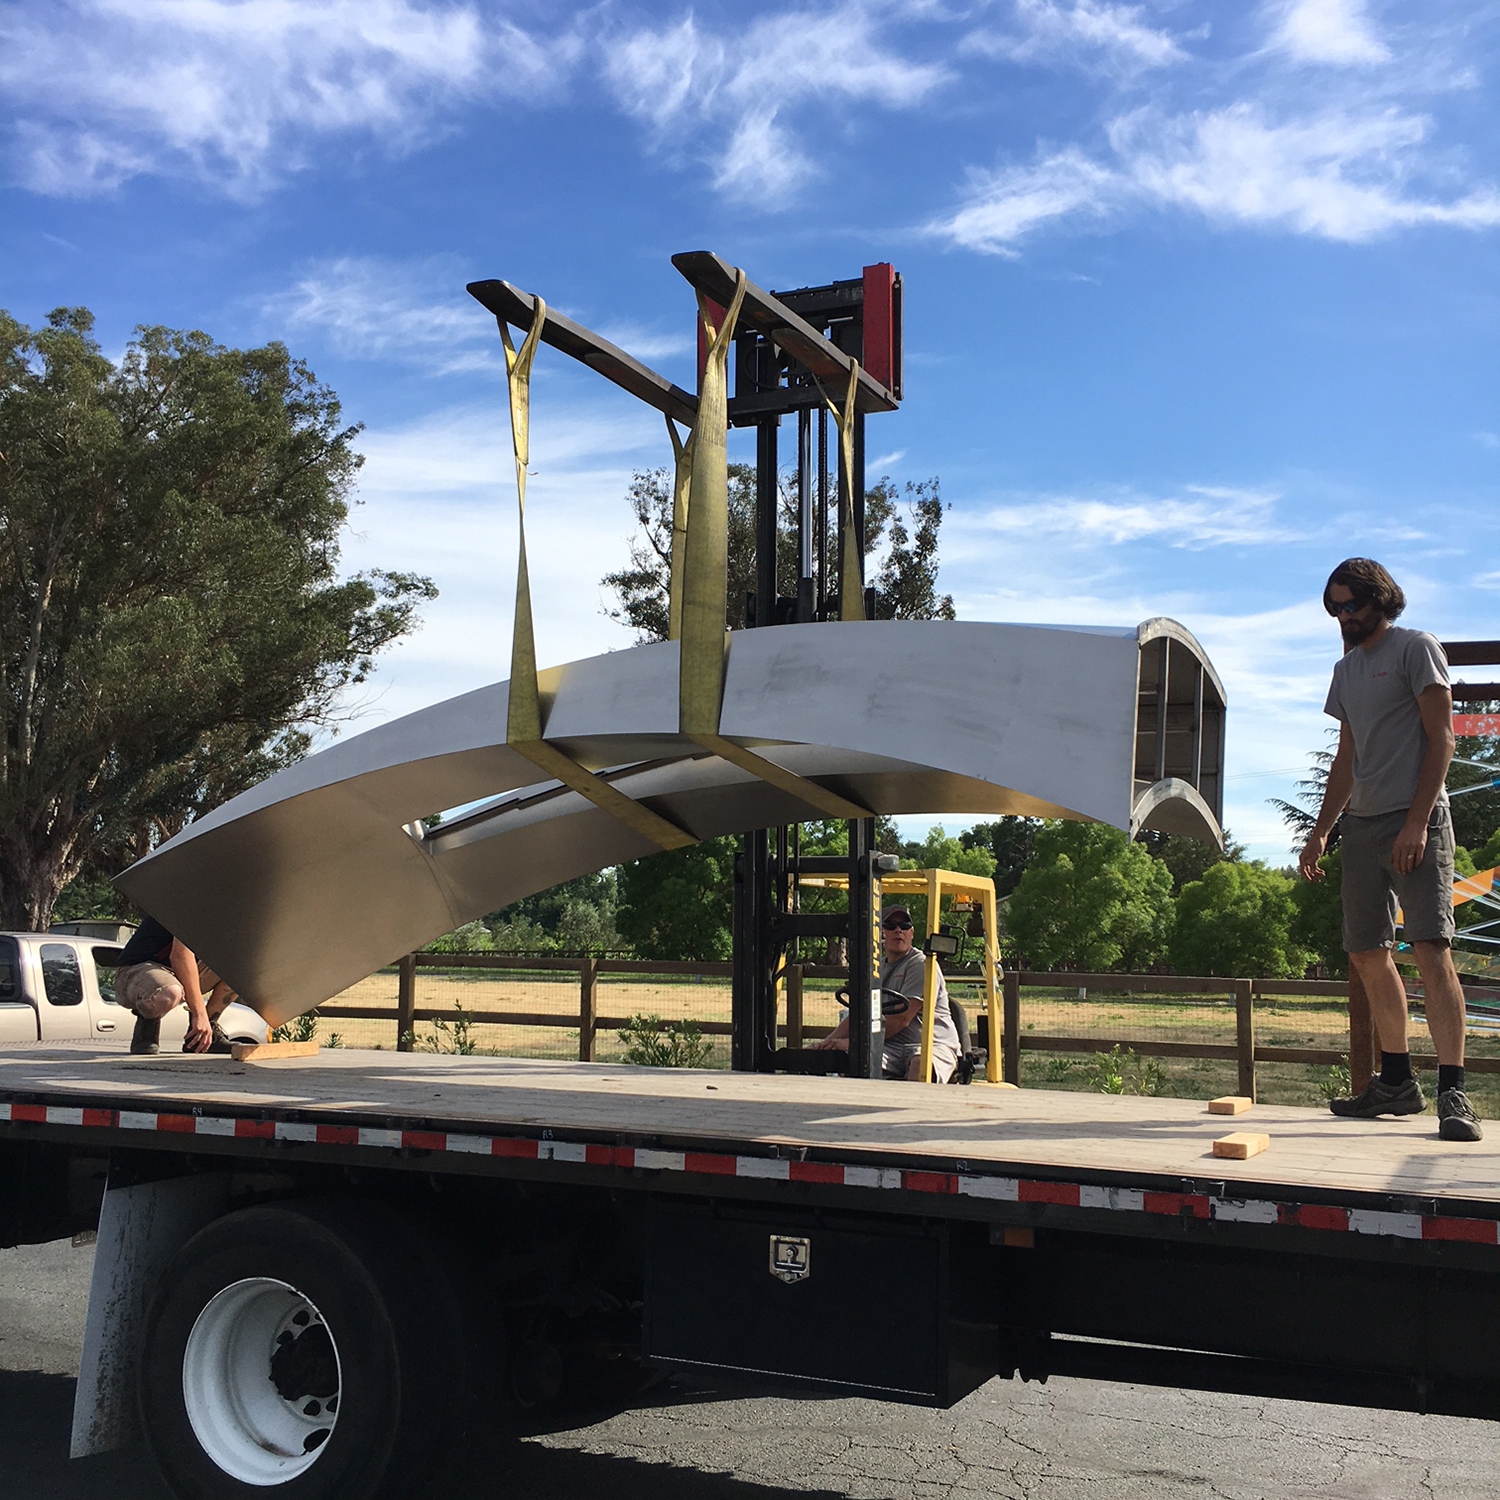 Gordon Huether Studio loading the sculpture 'Silver Twist' to be installed at Bottlerock Napa Valley 2017